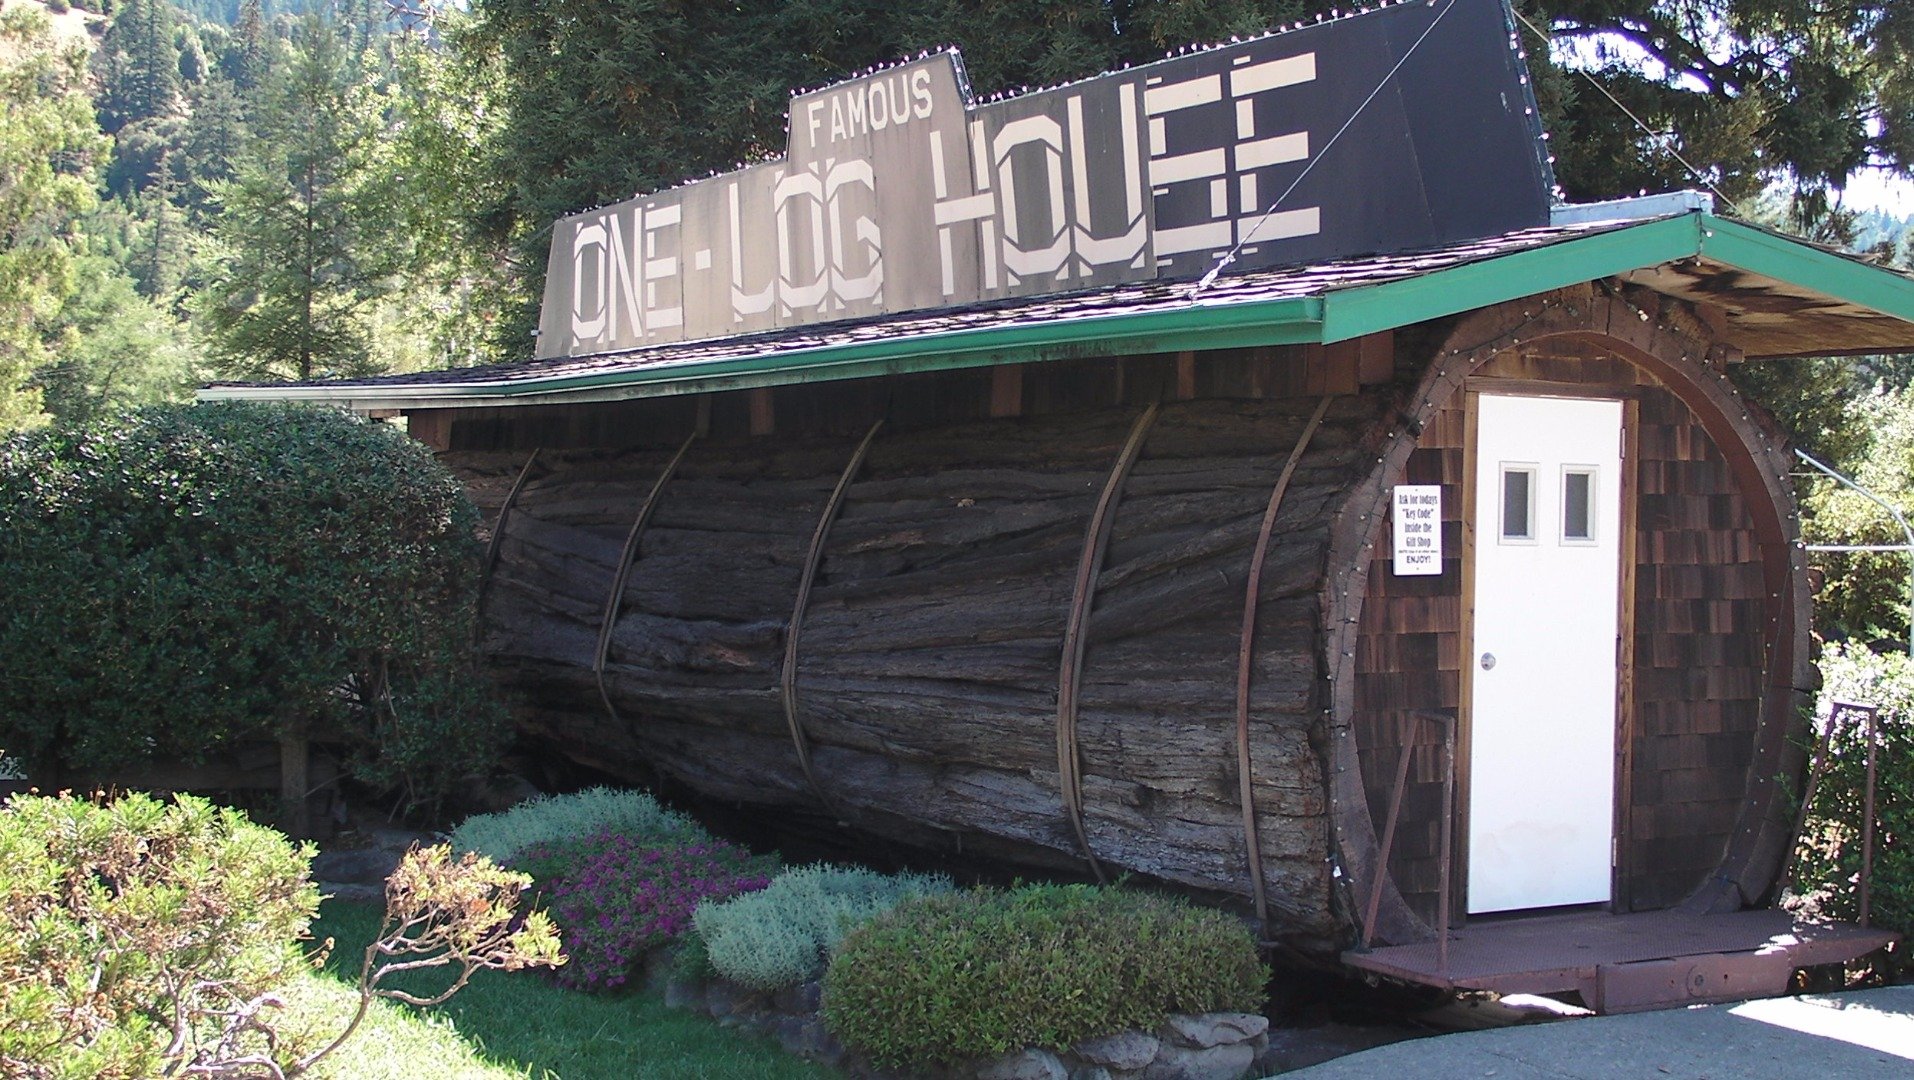 The One Log House (Garberville, CA)